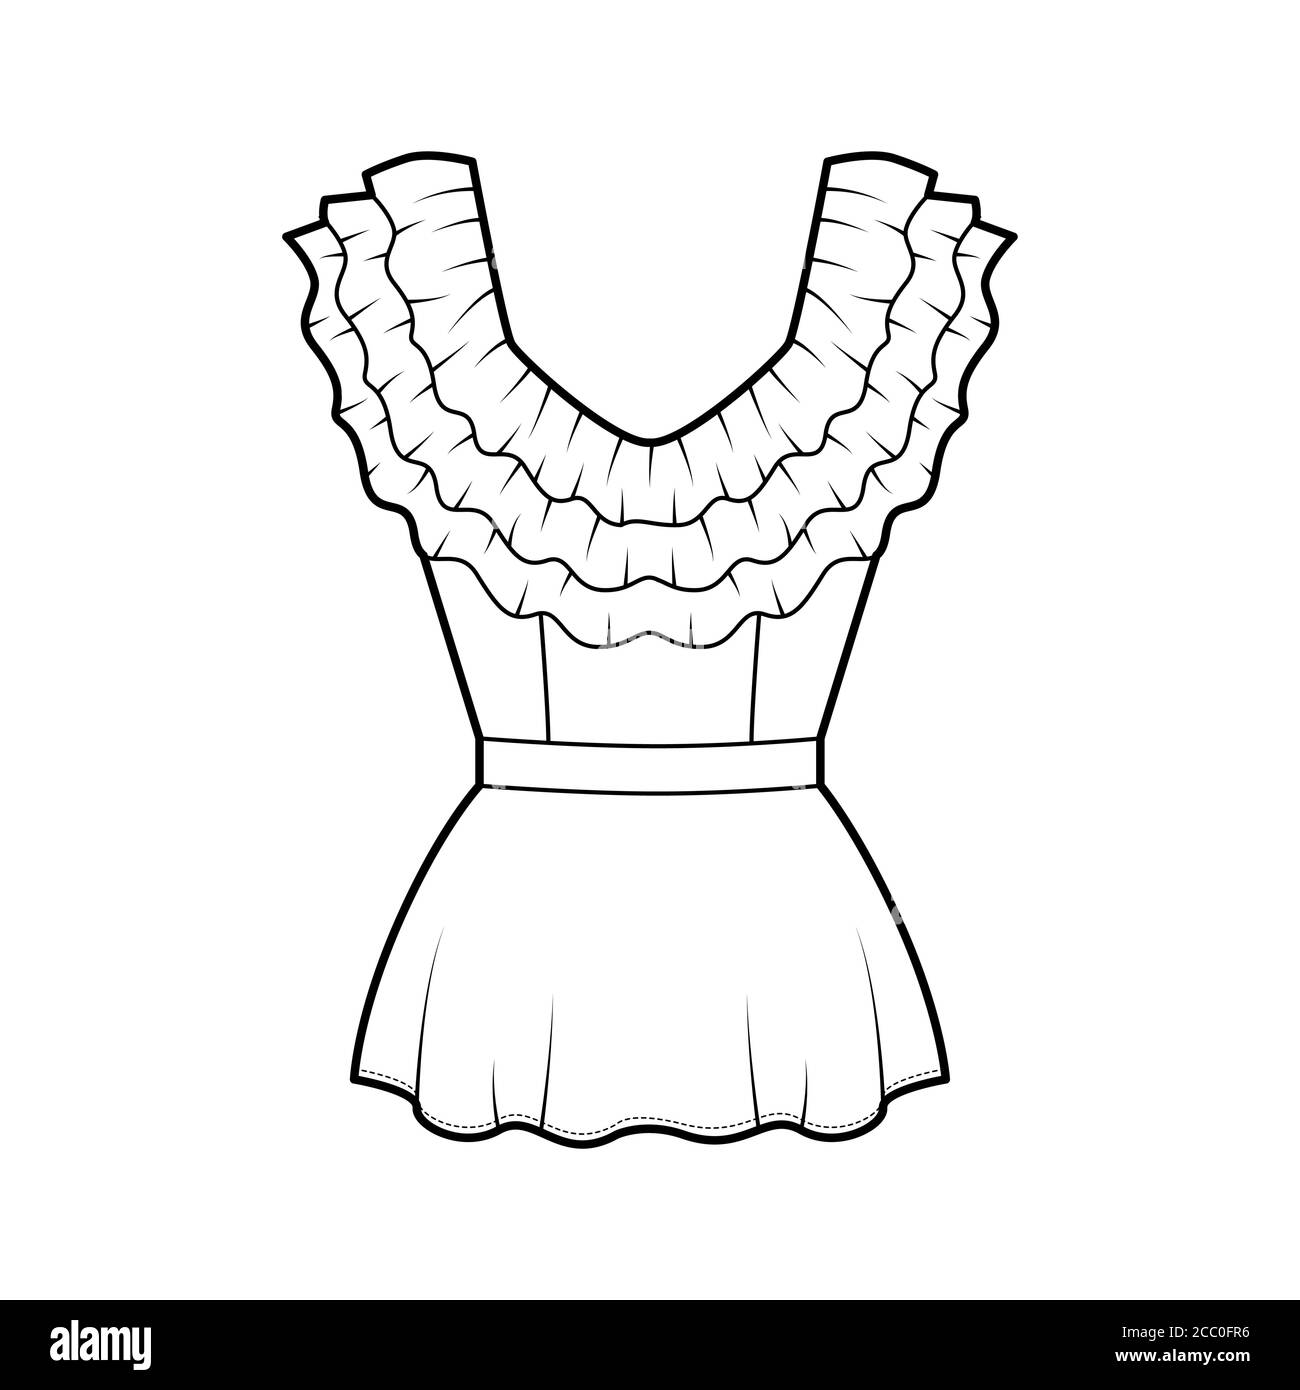 Peplum blouse technical fashion illustration with 3 layers of ruffles along the diamond neckline, back zip fastening. Flat apparel shirt template front, white color. Women men unisex top CAD mockup Stock Vector